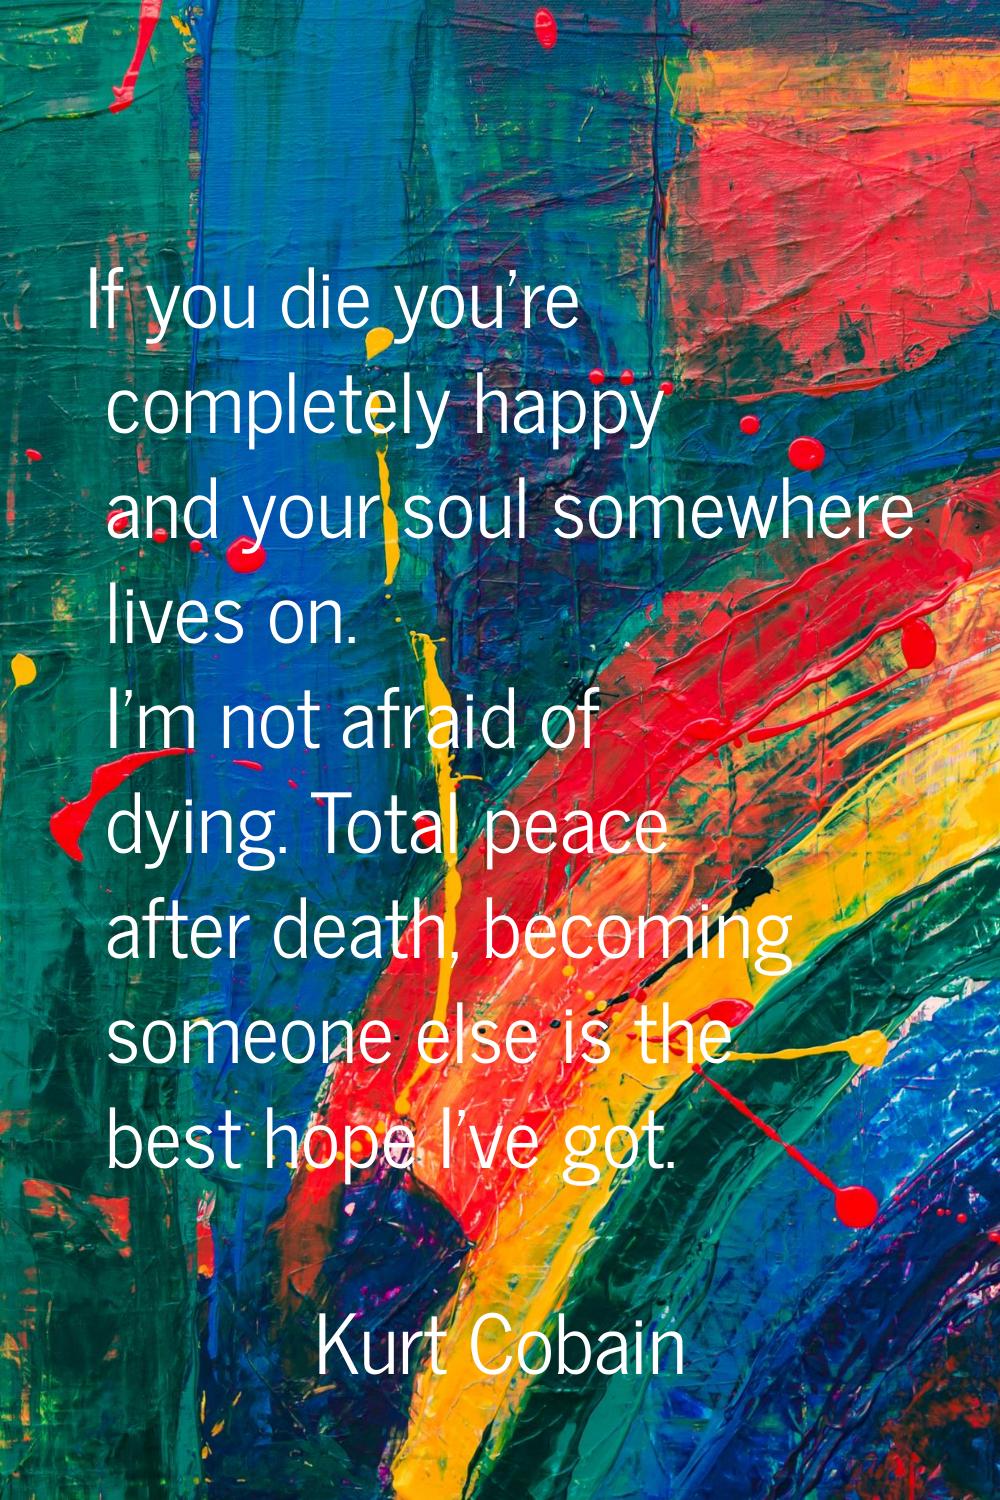 If you die you're completely happy and your soul somewhere lives on. I'm not afraid of dying. Total